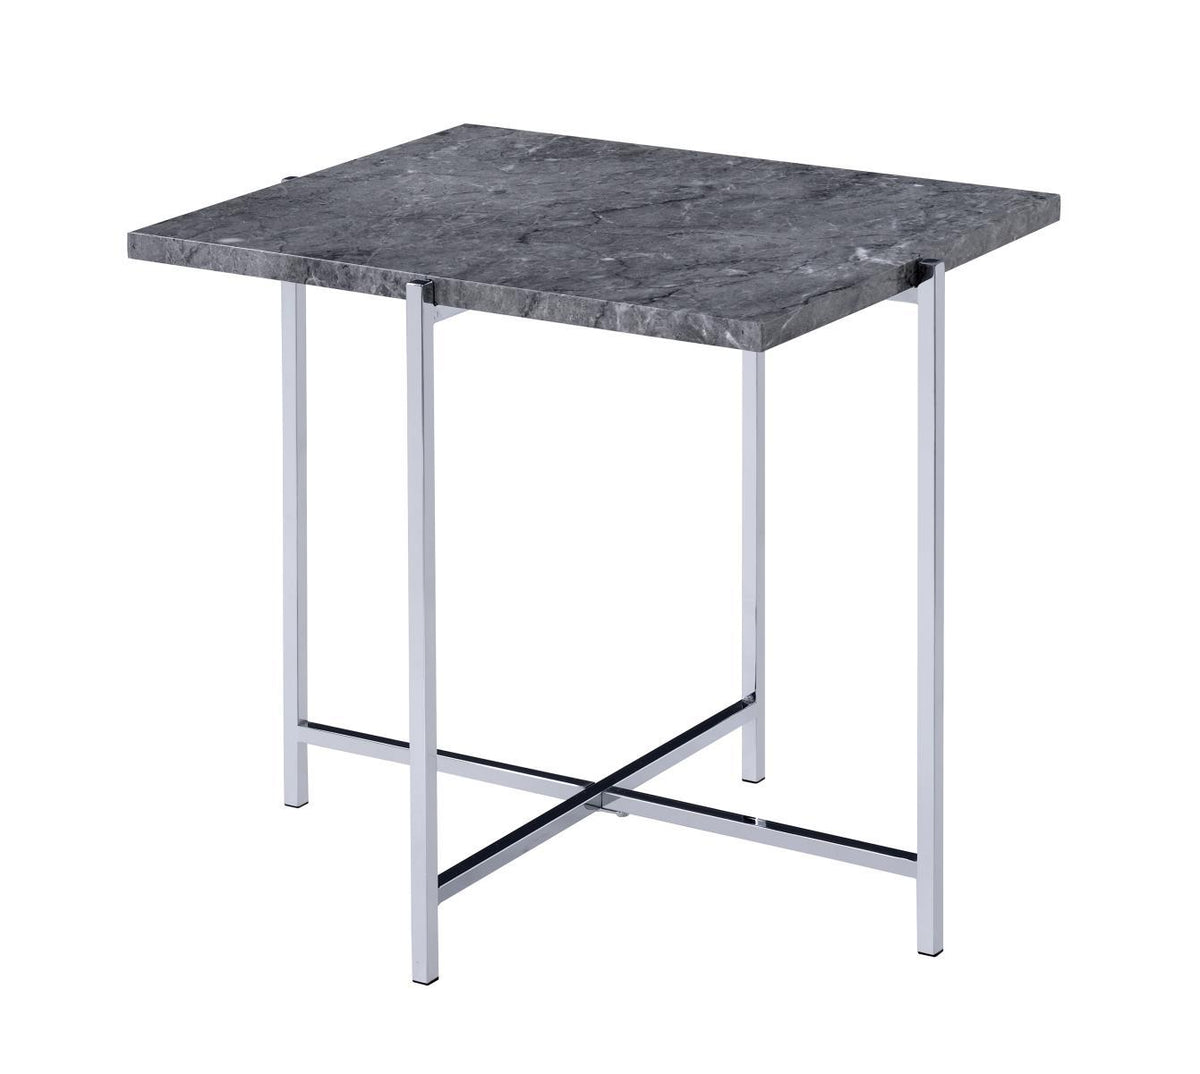 Contemporary Marble Top End Table with Trestle Base , Gray and Silver - BM204501